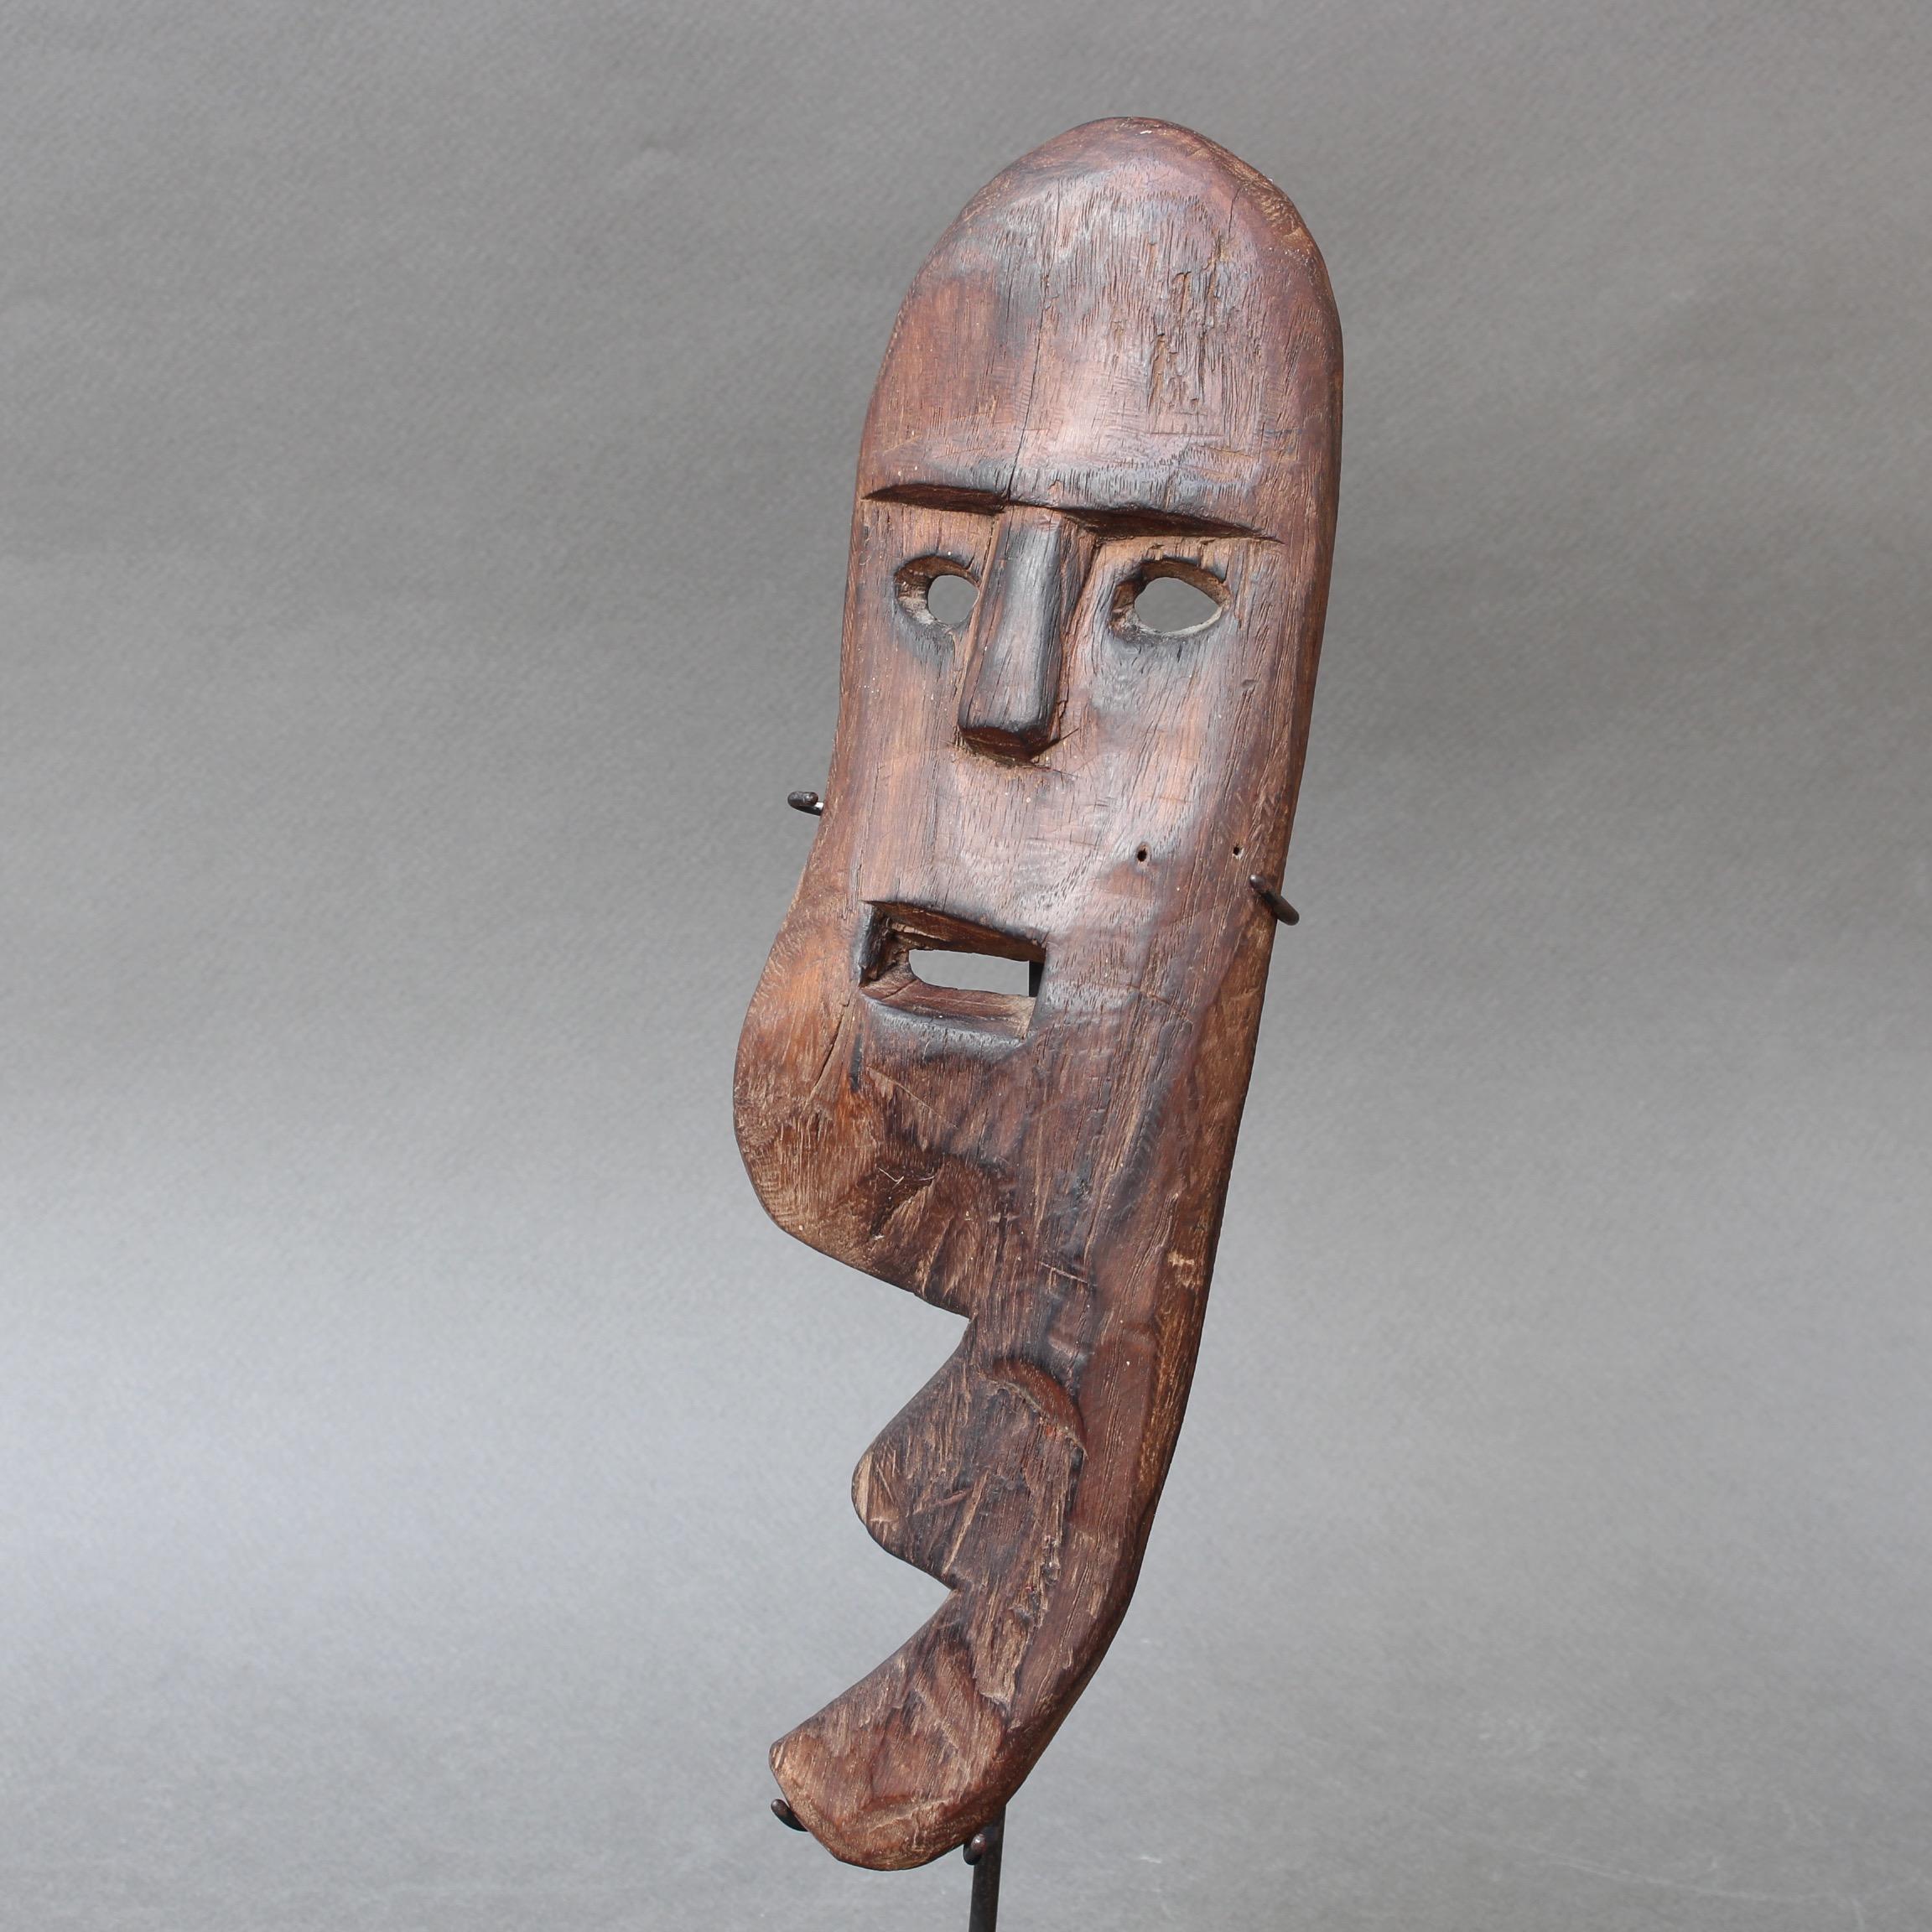 Sculpted Wooden Traditional Mask from Timor, Indonesia, circa 1960s-1970s 2